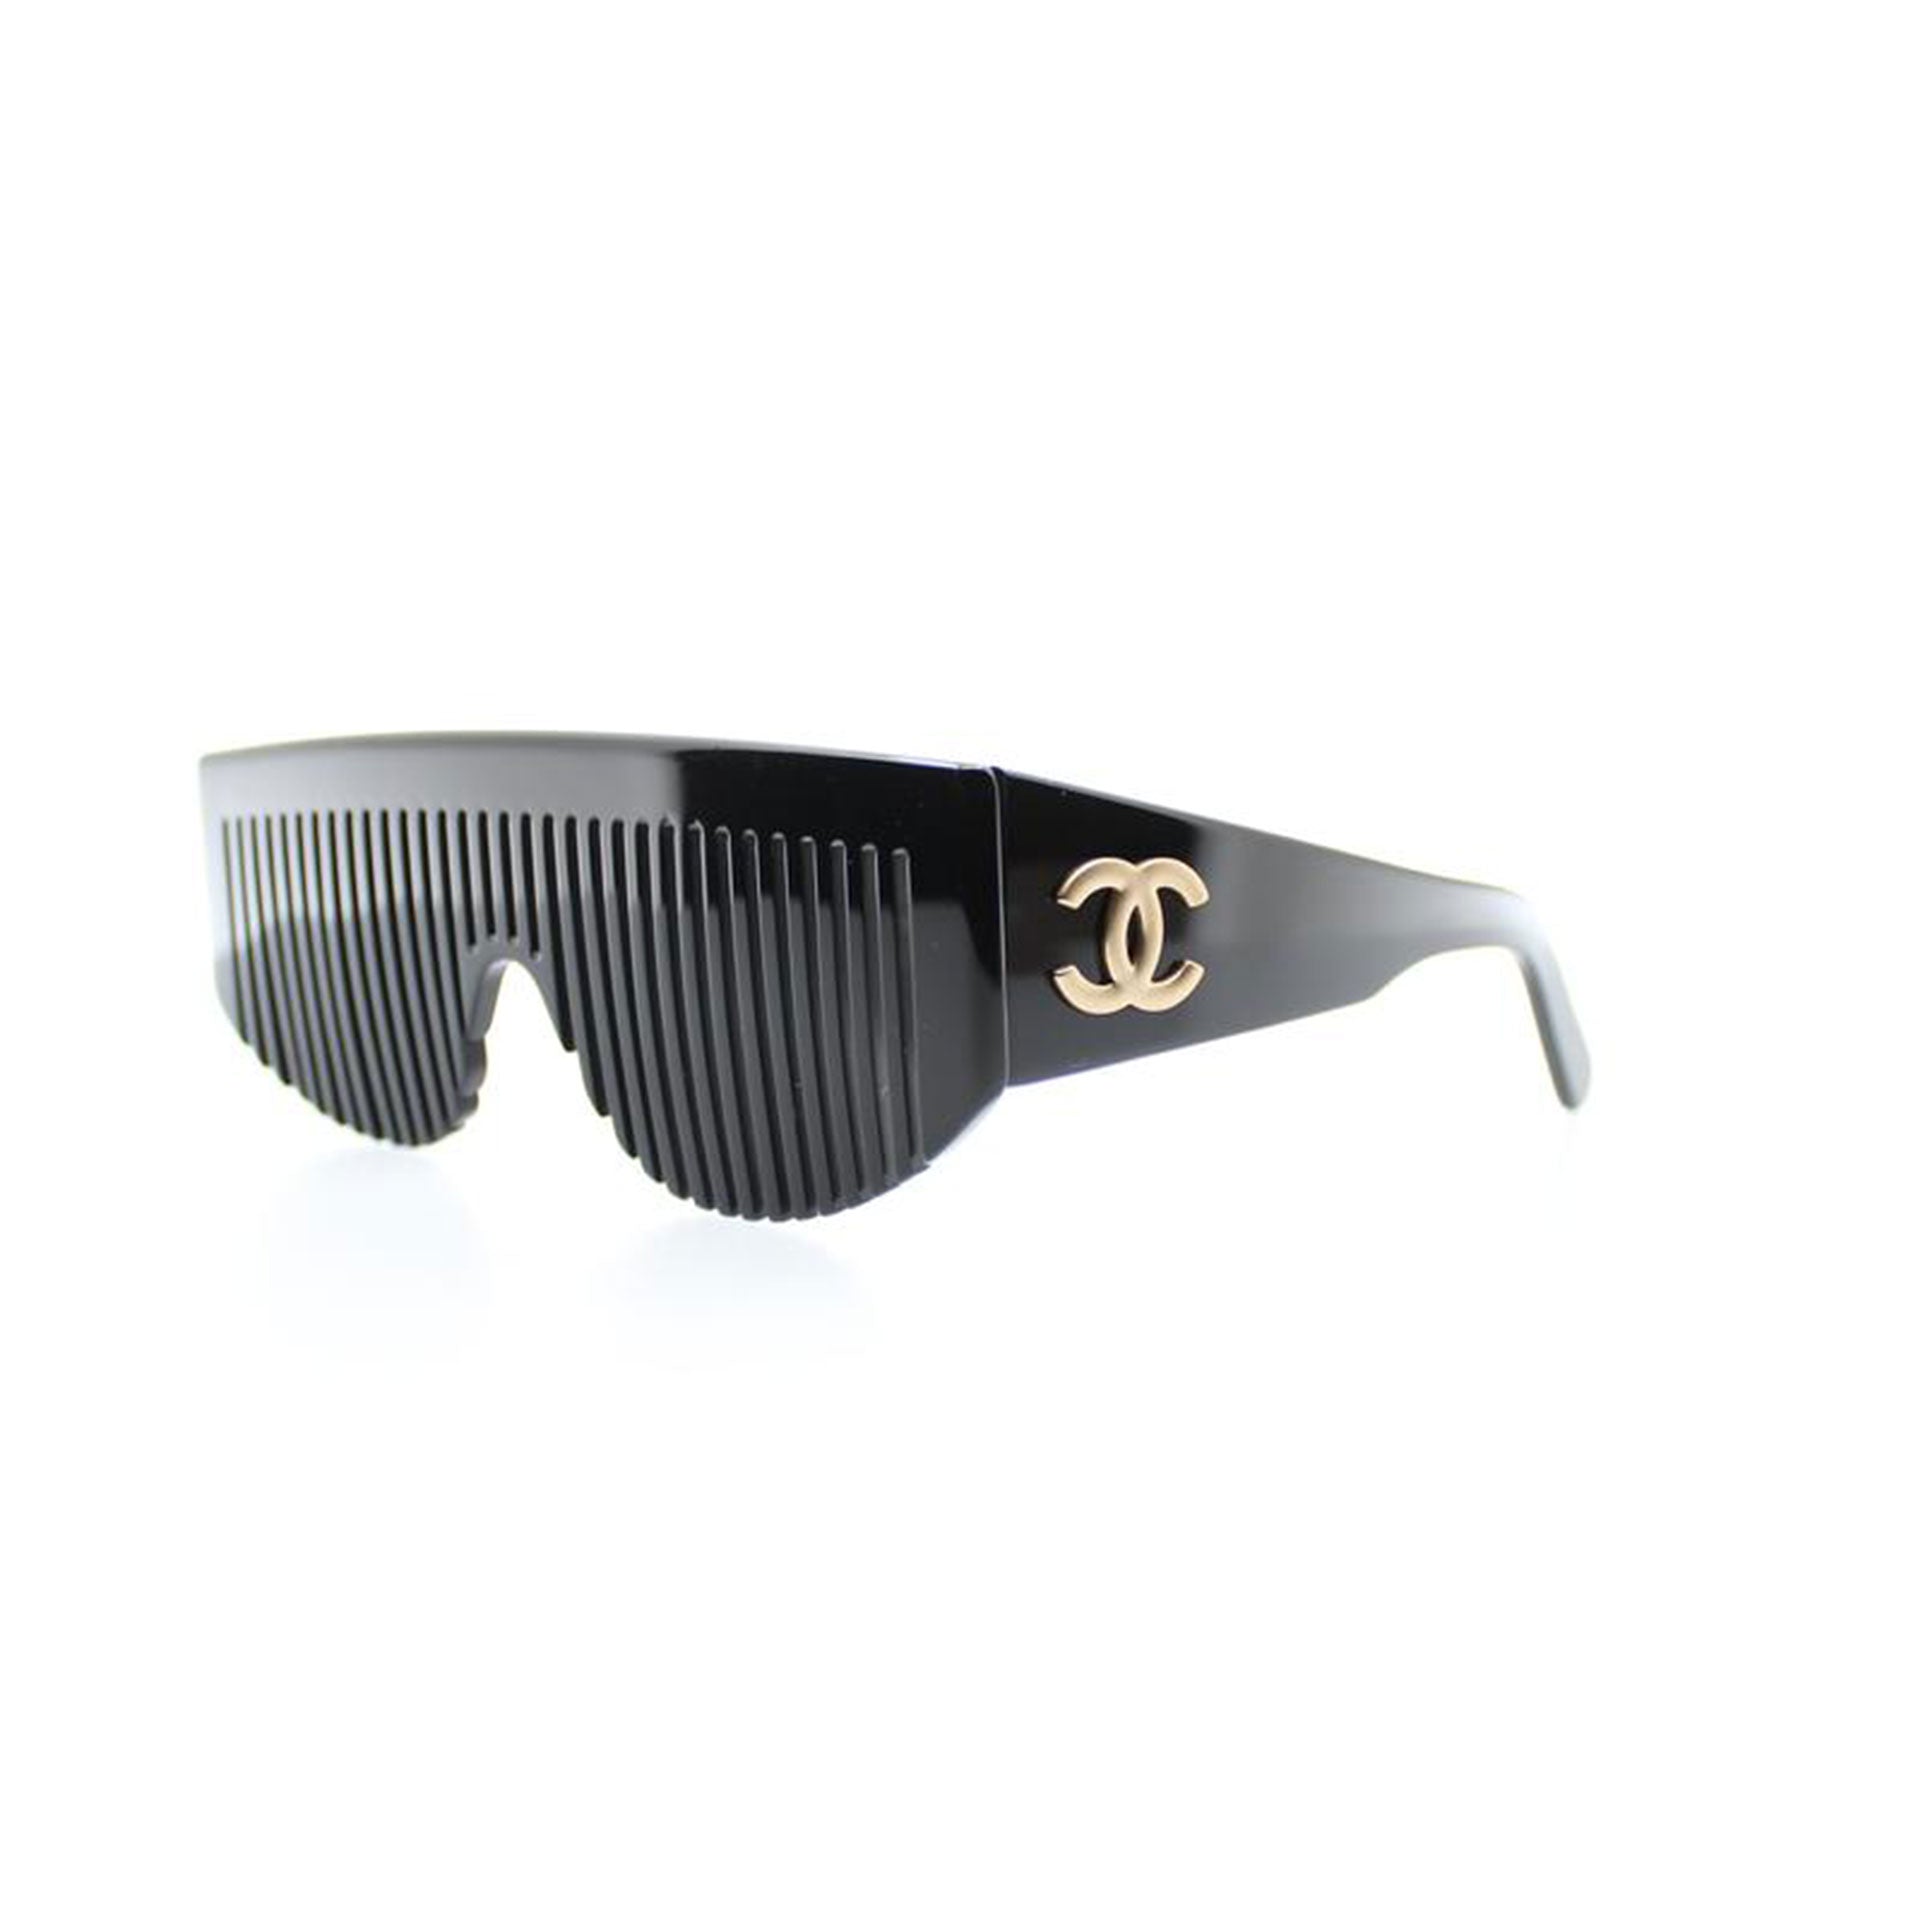 Authentic Vintage 90's CHANEL Black Sunglasses Large Round W Silver CC  Design for Sale in Seattle, WA - OfferUp